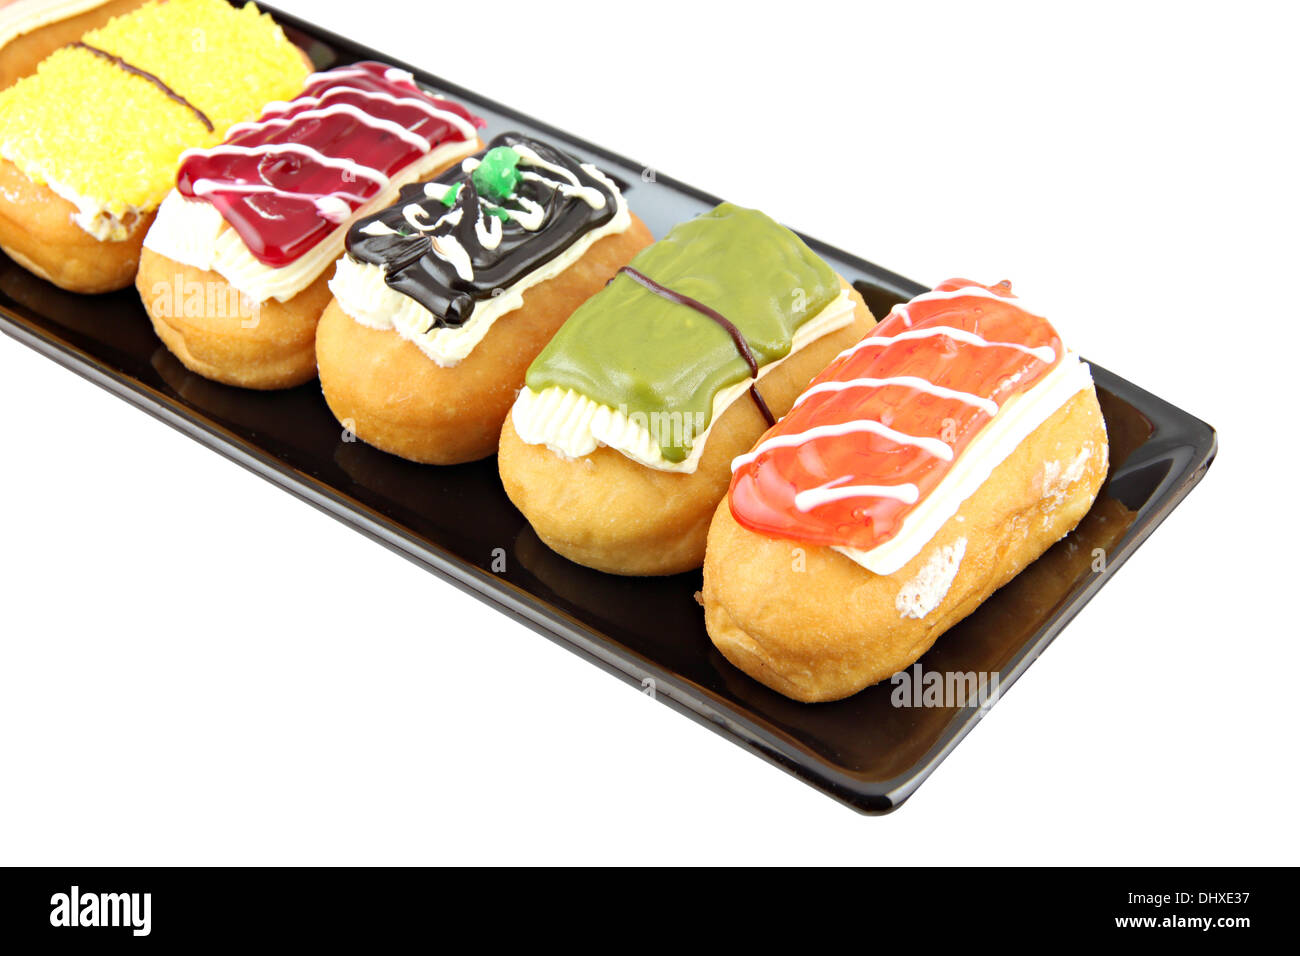 Donuts sort in the black dish on white background. Stock Photo